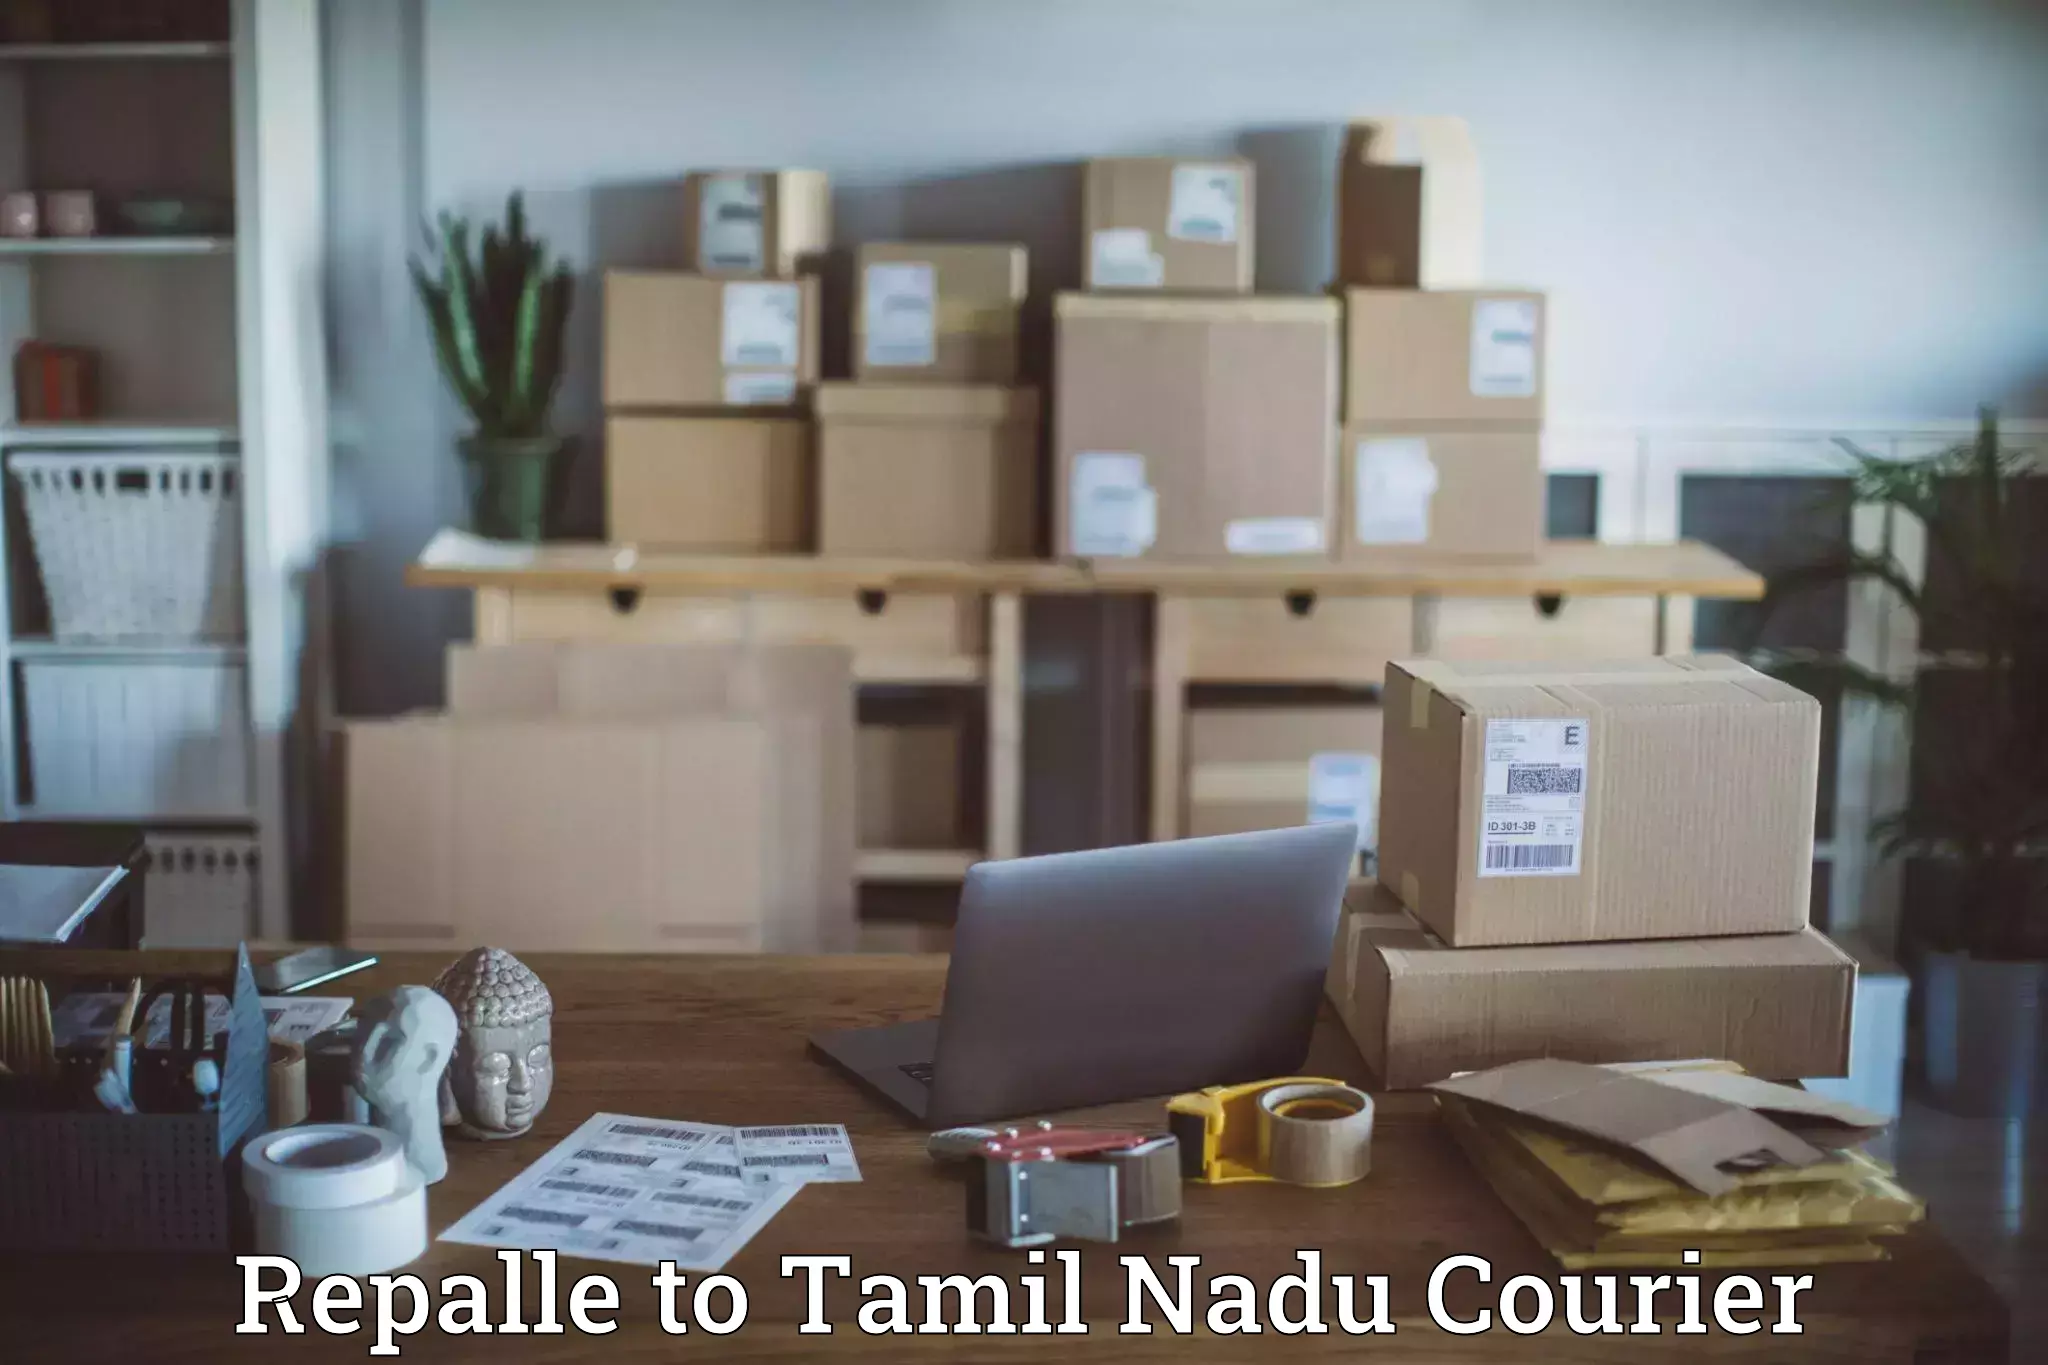 Tailored delivery services Repalle to Tamil Nadu